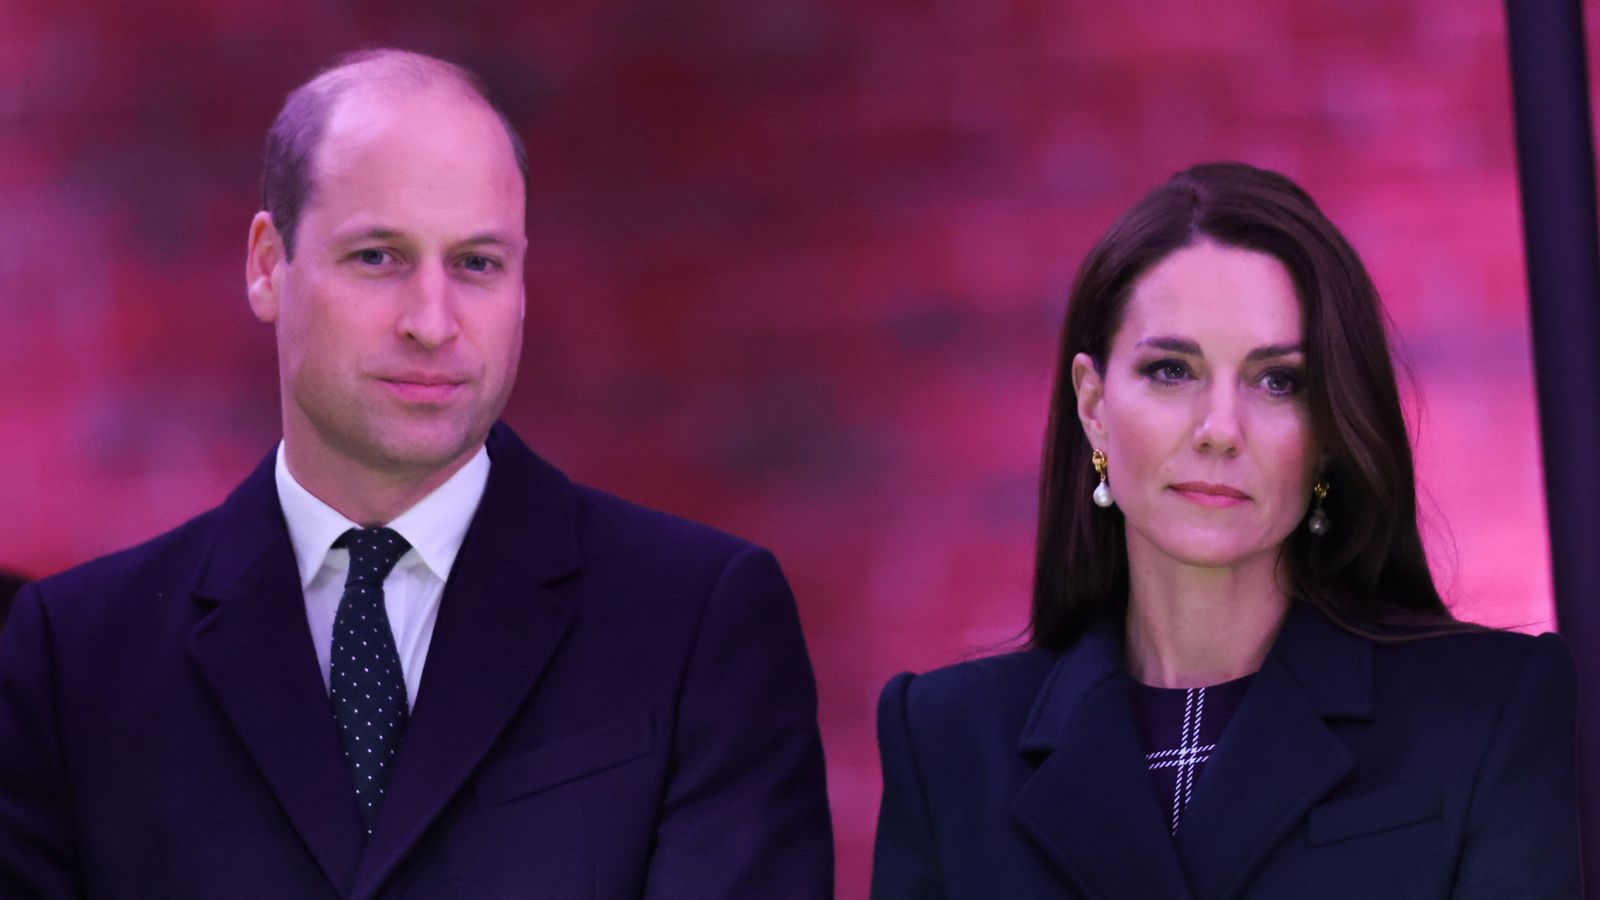 William and Kate arrive in US as prince distances himself from race row